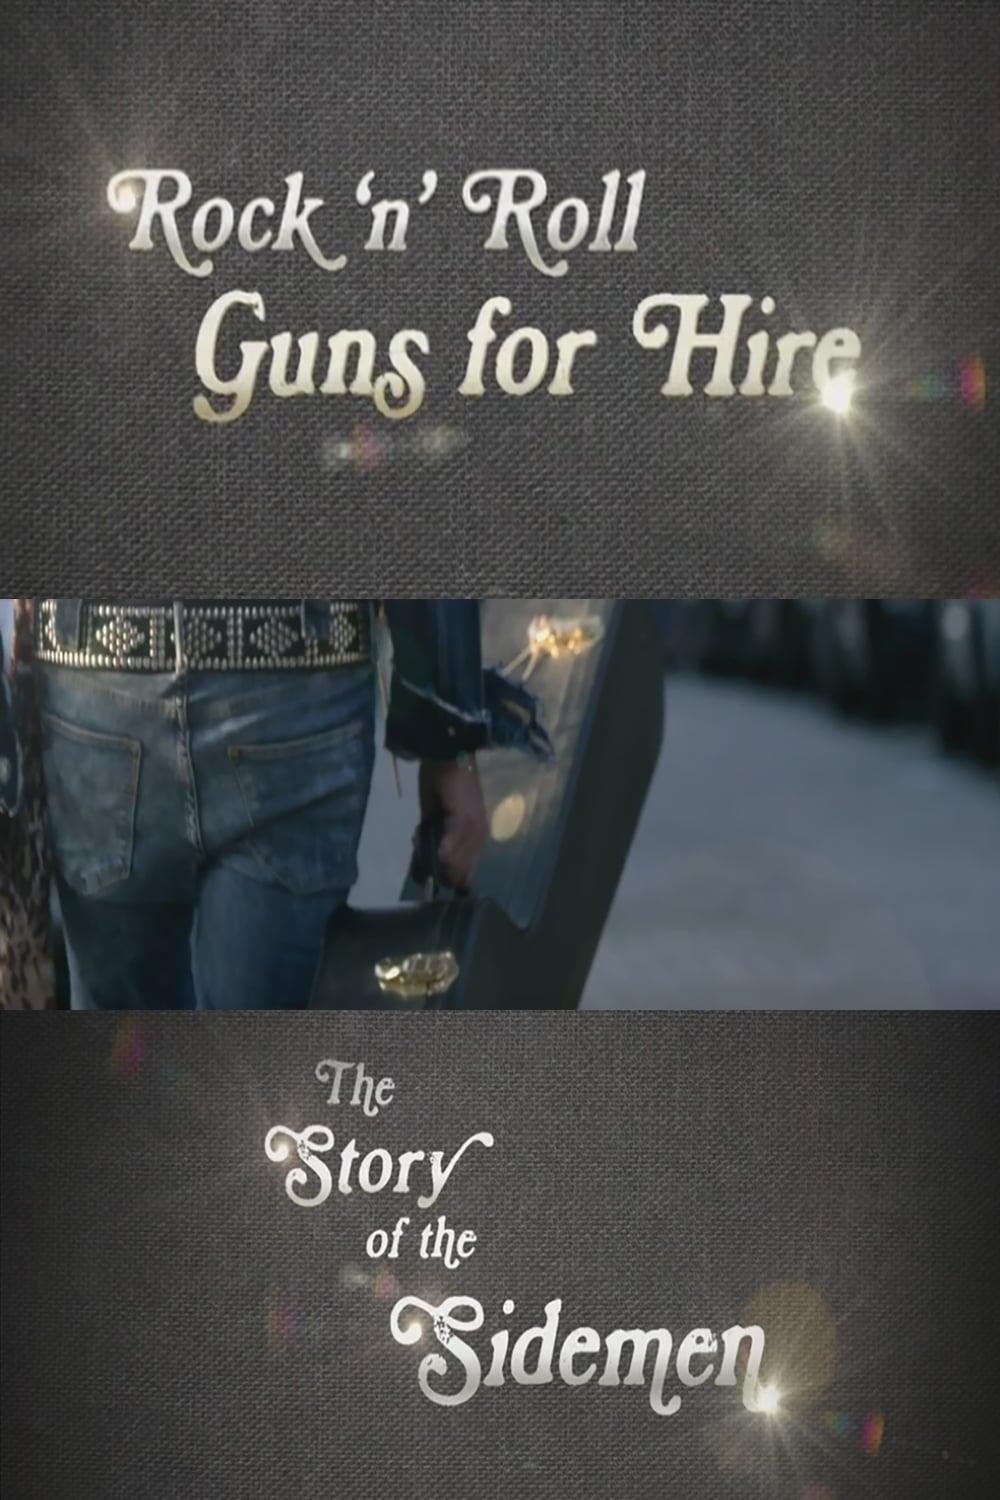 Rock 'n' Roll Guns for Hire - The Story of the Sidemen poster